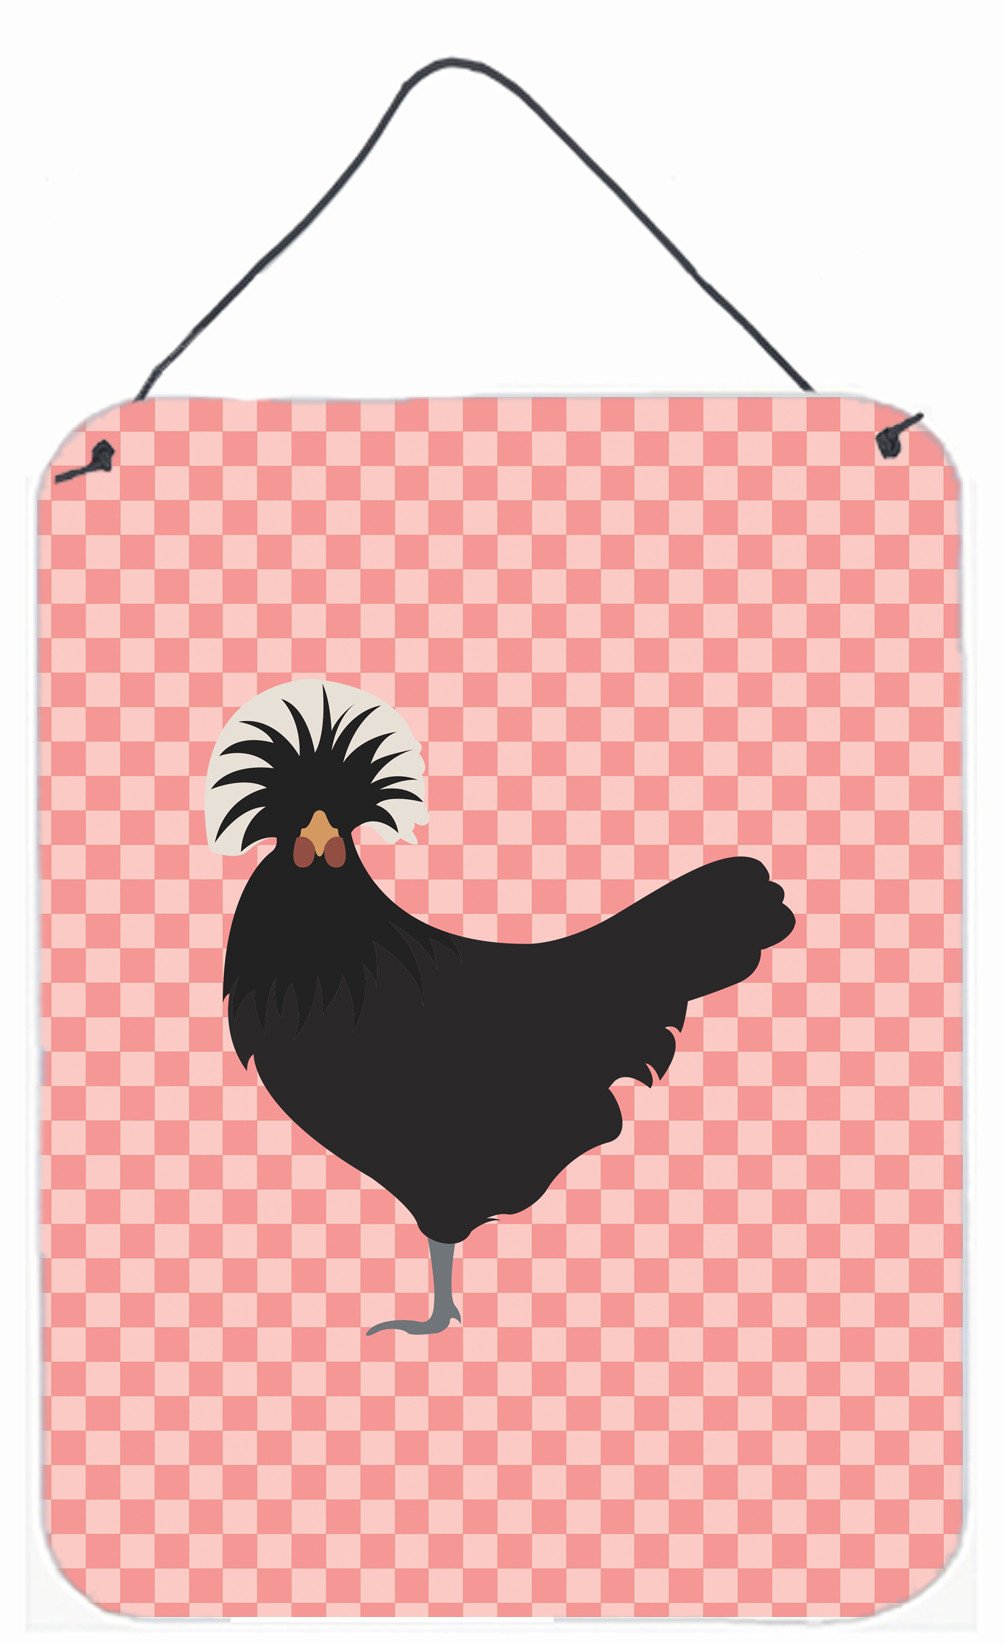 Polish Poland Chicken Pink Check Wall or Door Hanging Prints BB7834DS1216 by Caroline's Treasures